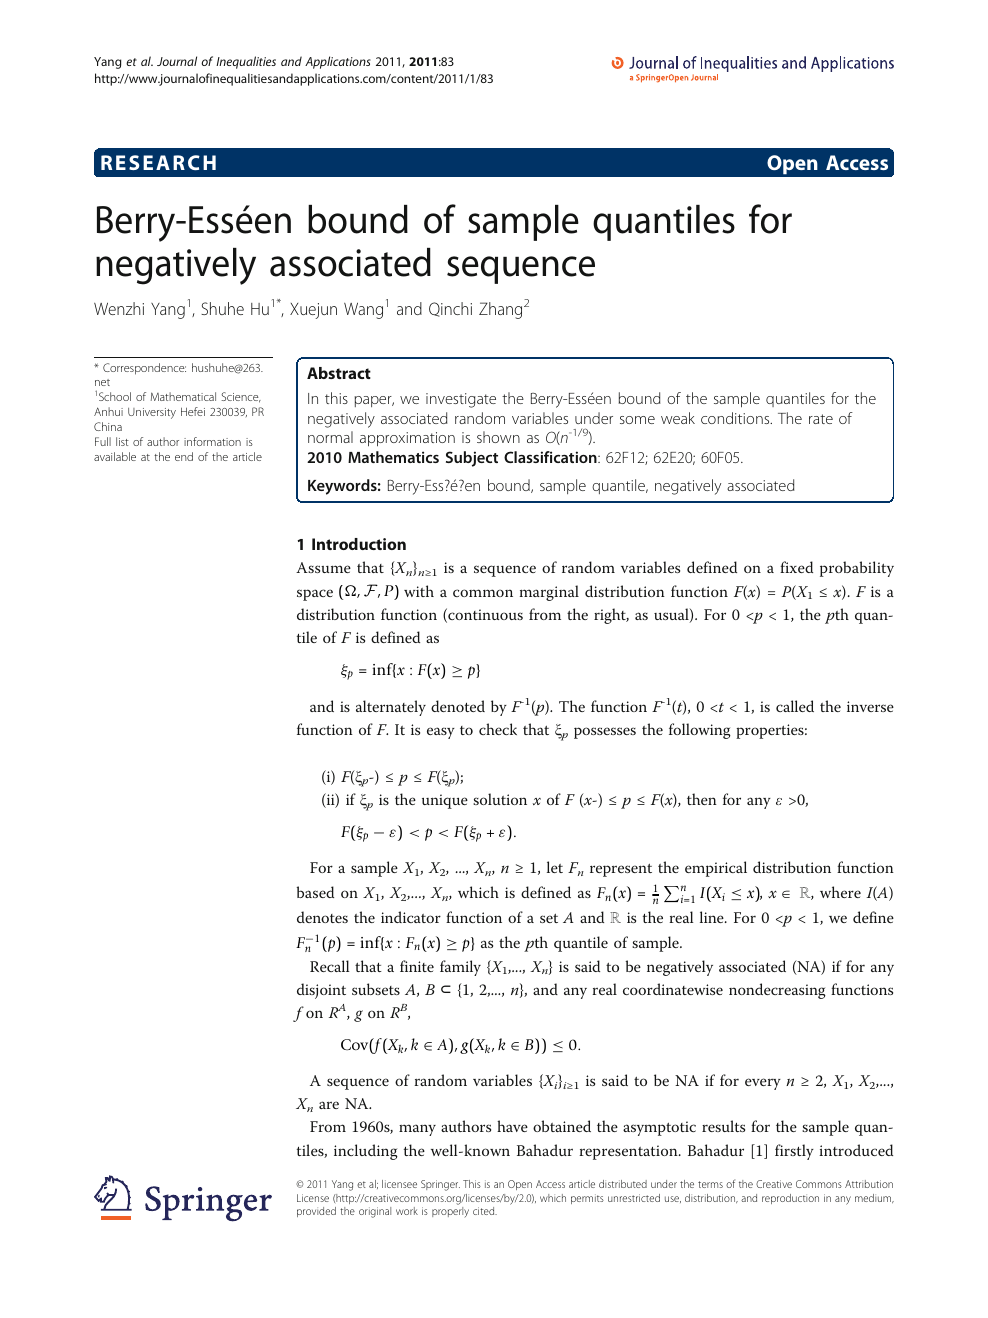 Berry Esseen Bound Of Sample Quantiles For Negatively Associated Sequence Topic Of Research Paper In Mathematics Download Scholarly Article Pdf And Read For Free On Cyberleninka Open Science Hub